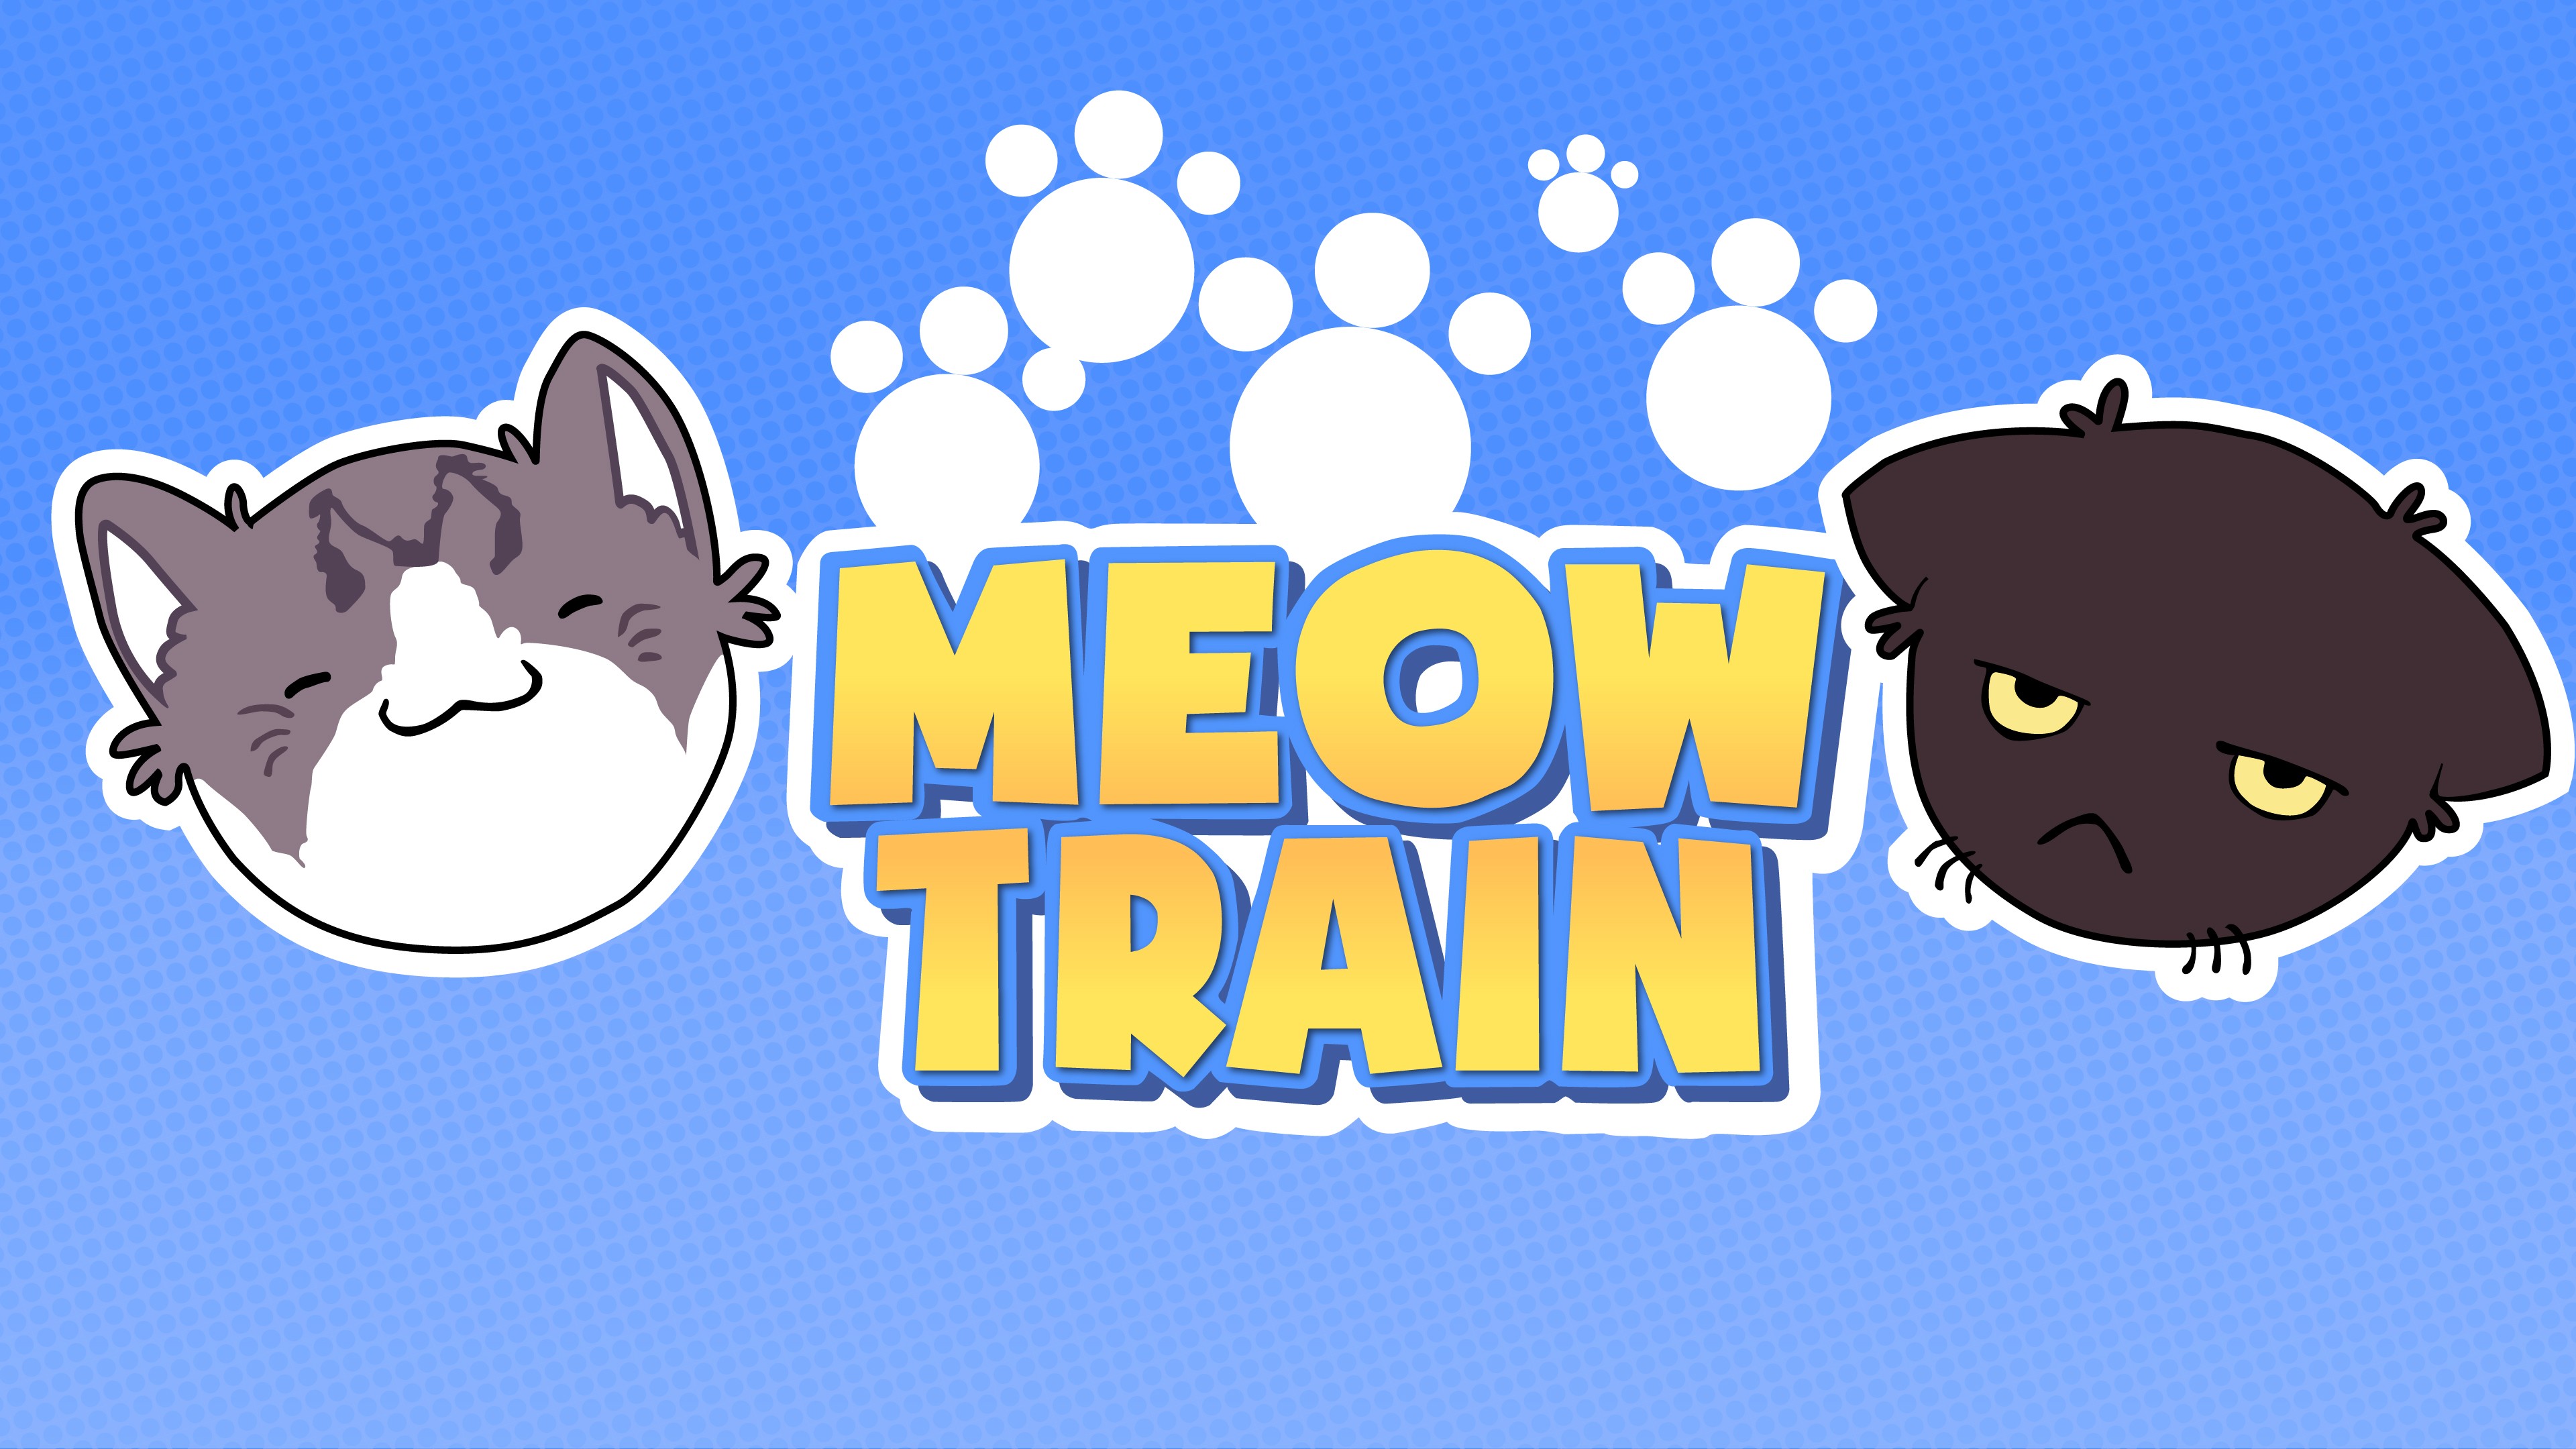 Game Grumps Steam Train Video Games YouTube Cats 3840x2160